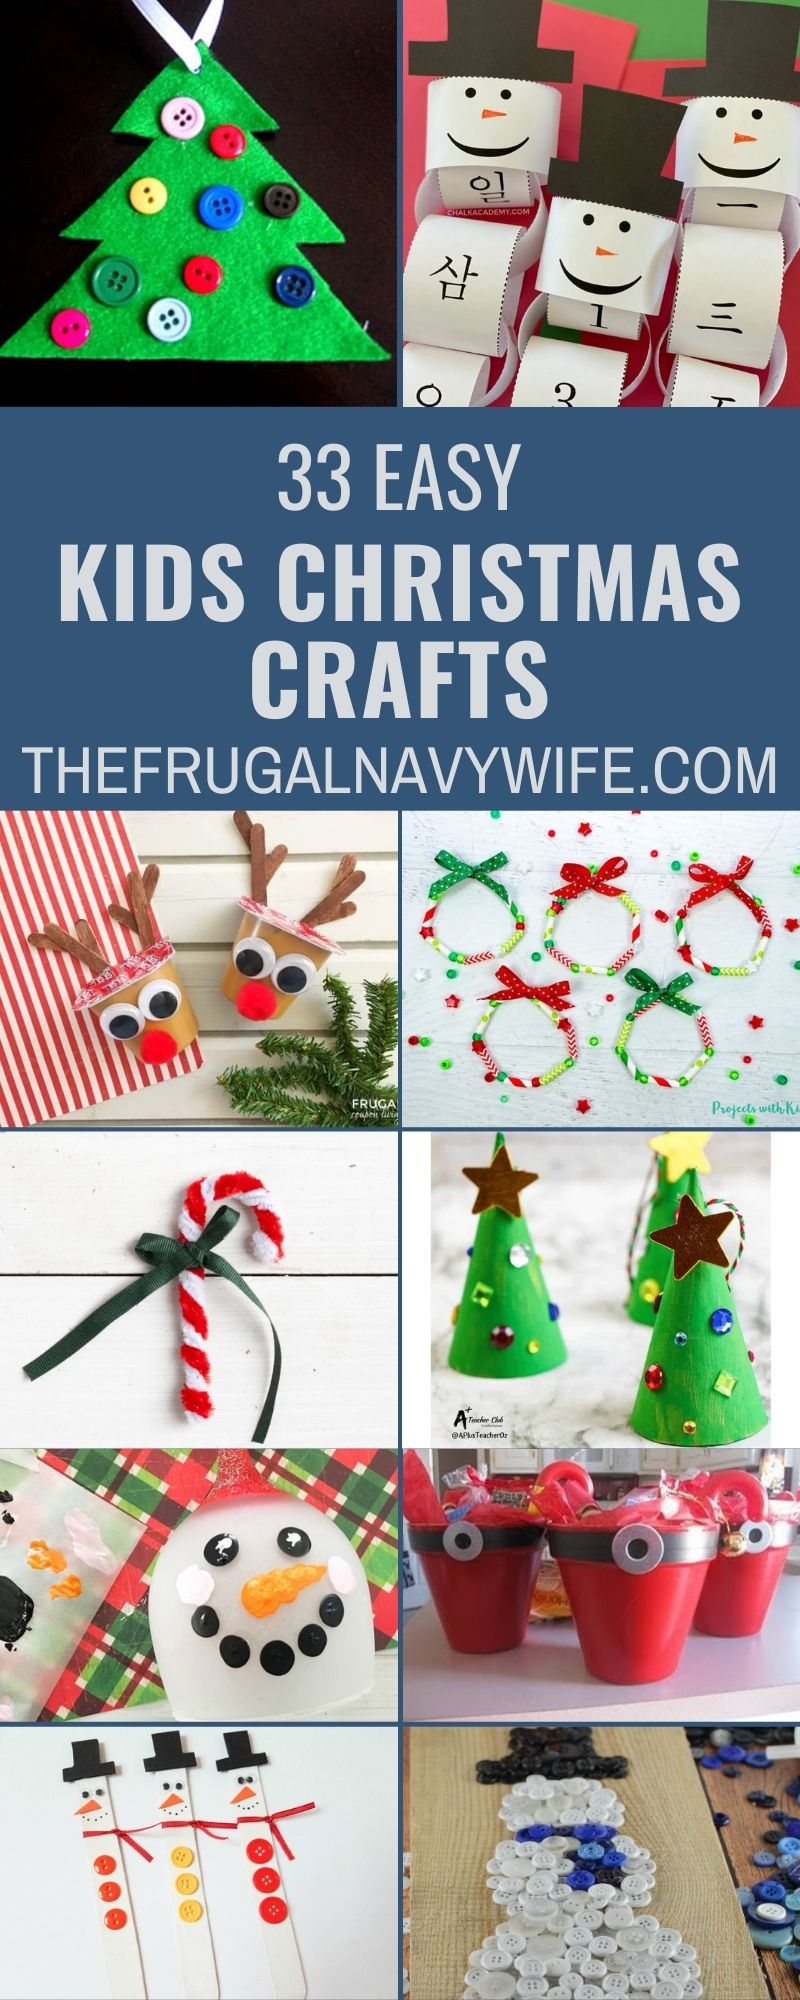 CHRISTMAS CRAFT IDEAS FOR KIDS  FUN & EASY ACTIVITIES TO KEEP KIDS BUSY  DURING HOLIDAY SEASON 